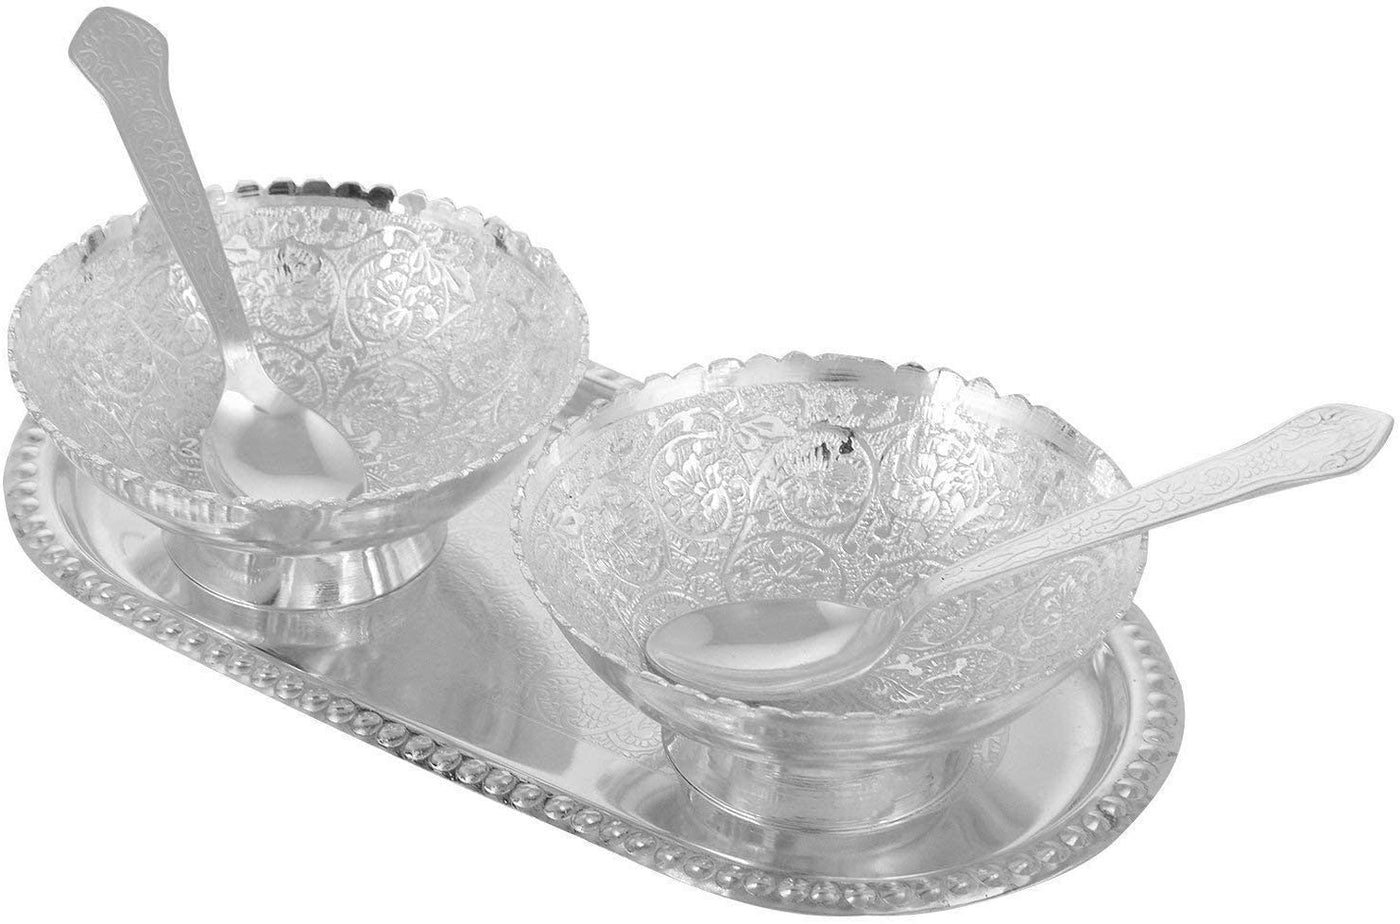 Buy INDESHU - Silver Plated Wedding Gift Bowl Set of 2 Diwali Gifts Online  at Low Prices in India - Amazon.in